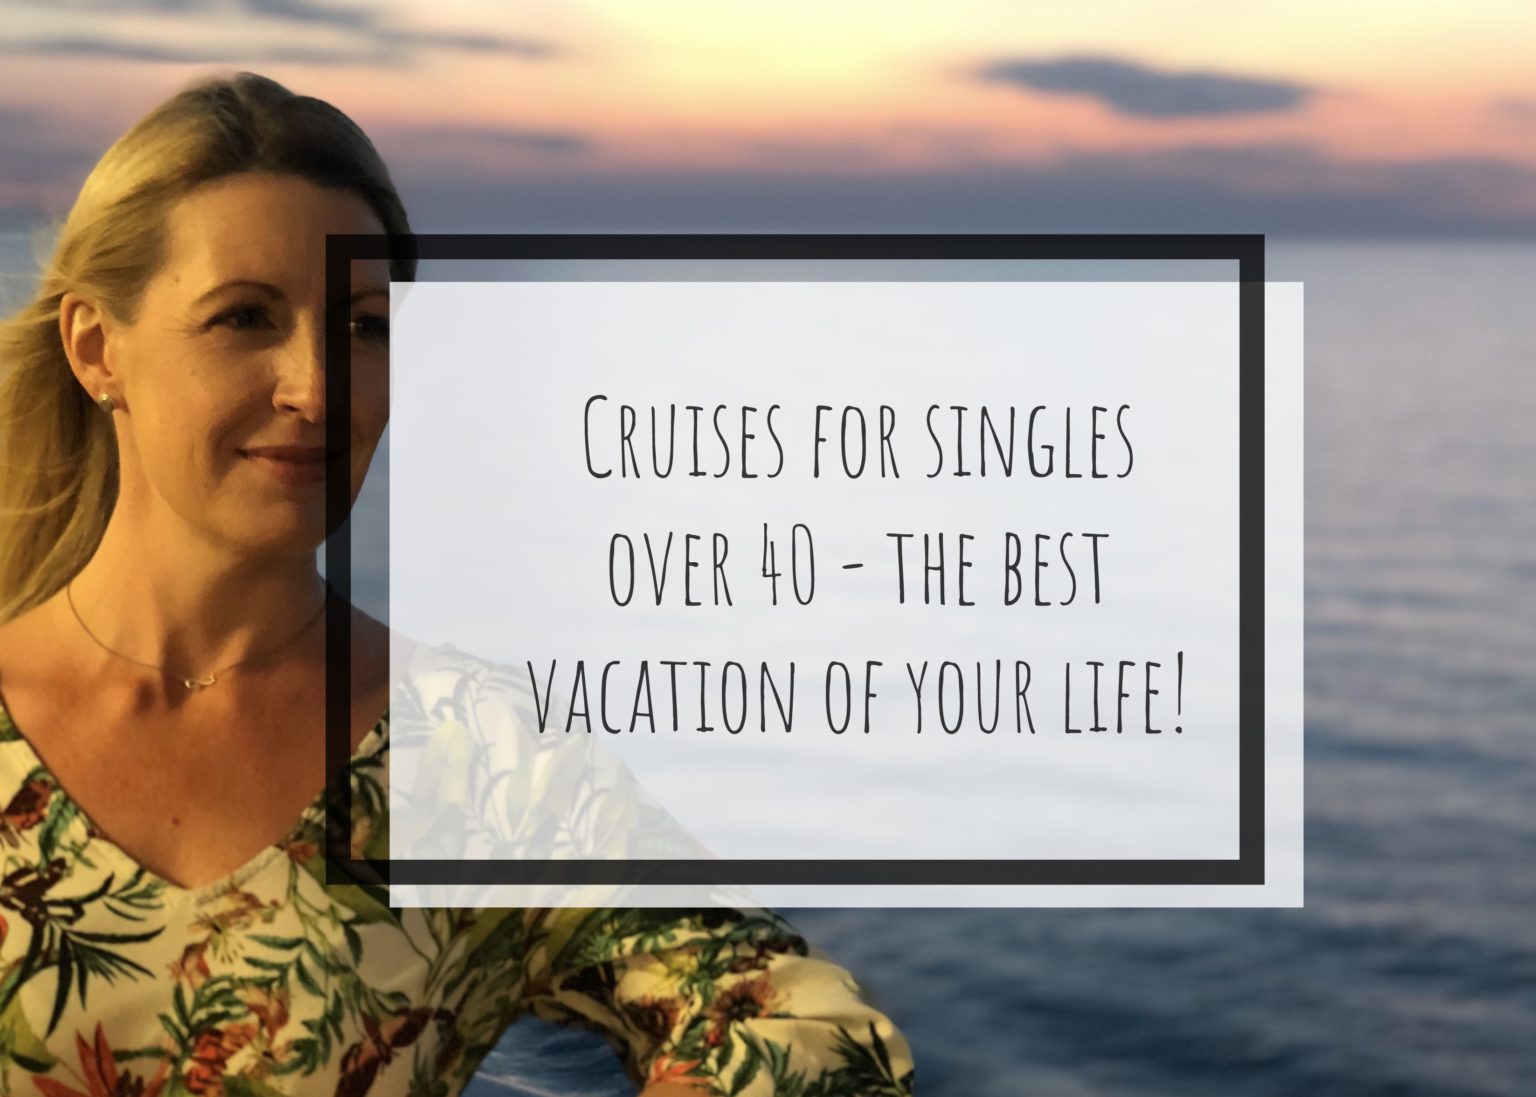 trips for singles in their 40s